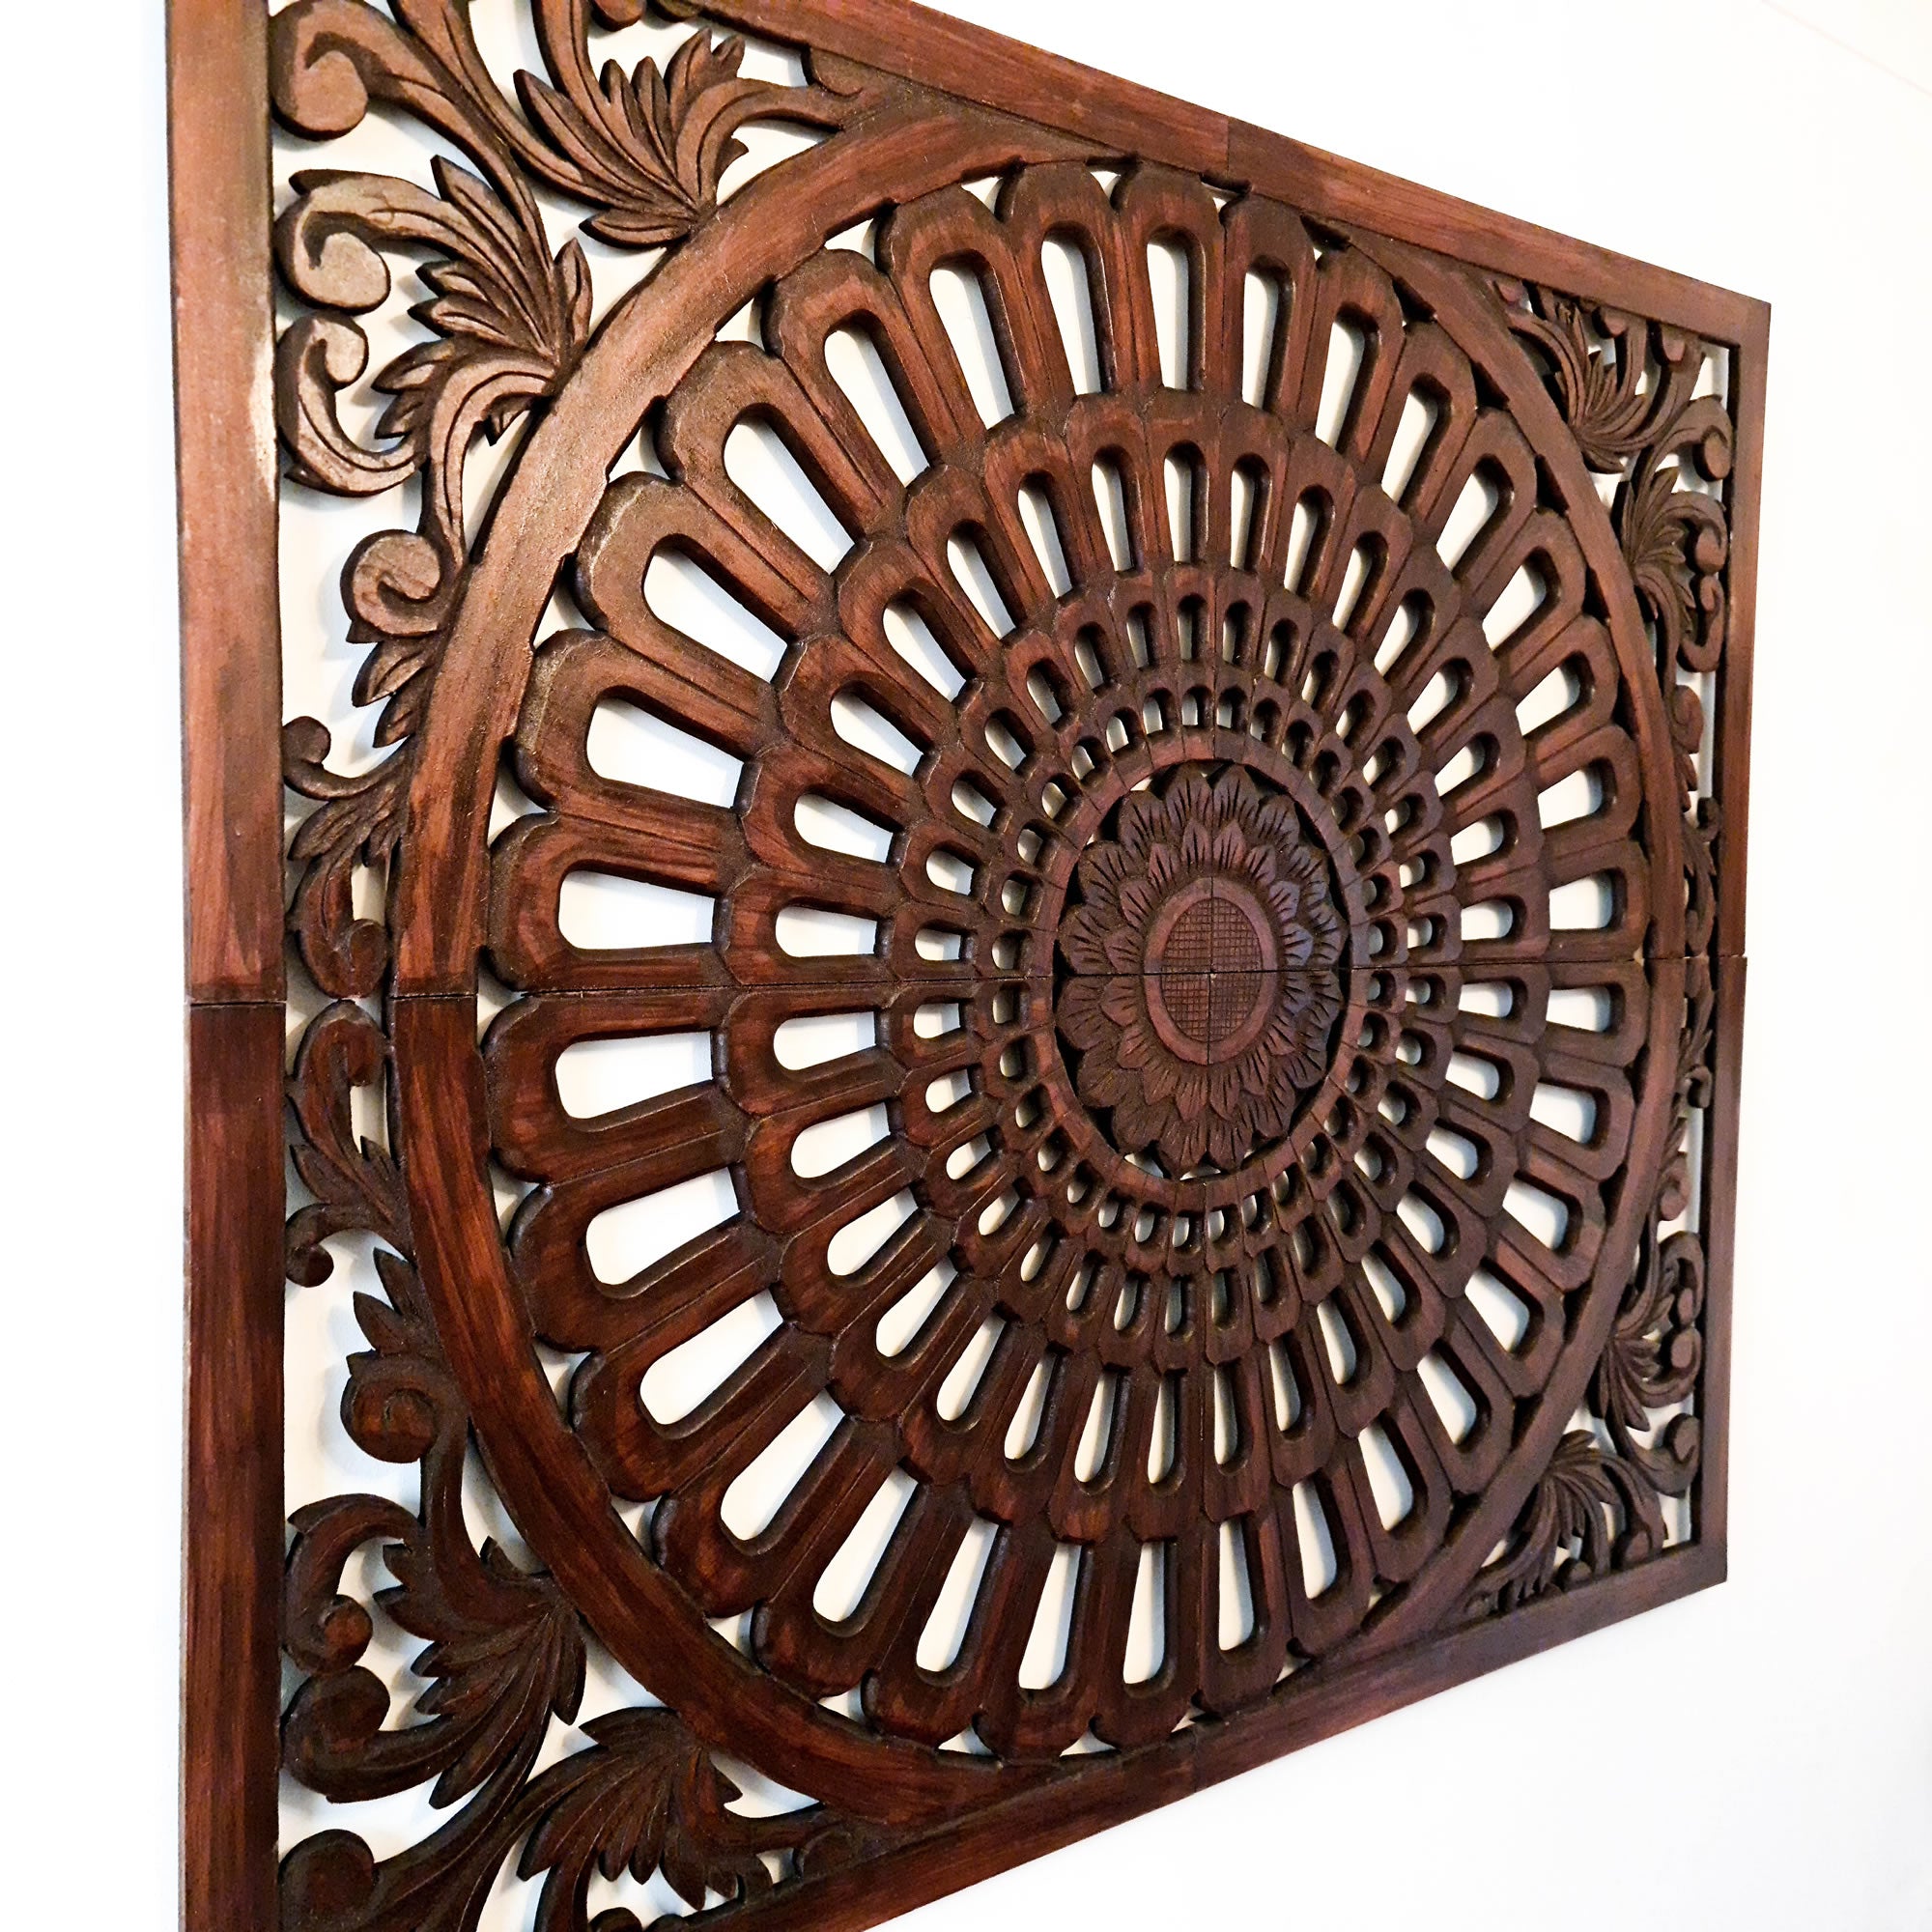 Stunning Large Hand-Carved Decorative Wooden Wall Art Mandala. This beauty is great for decorating your interior walls for an eye-catching backdrop. 